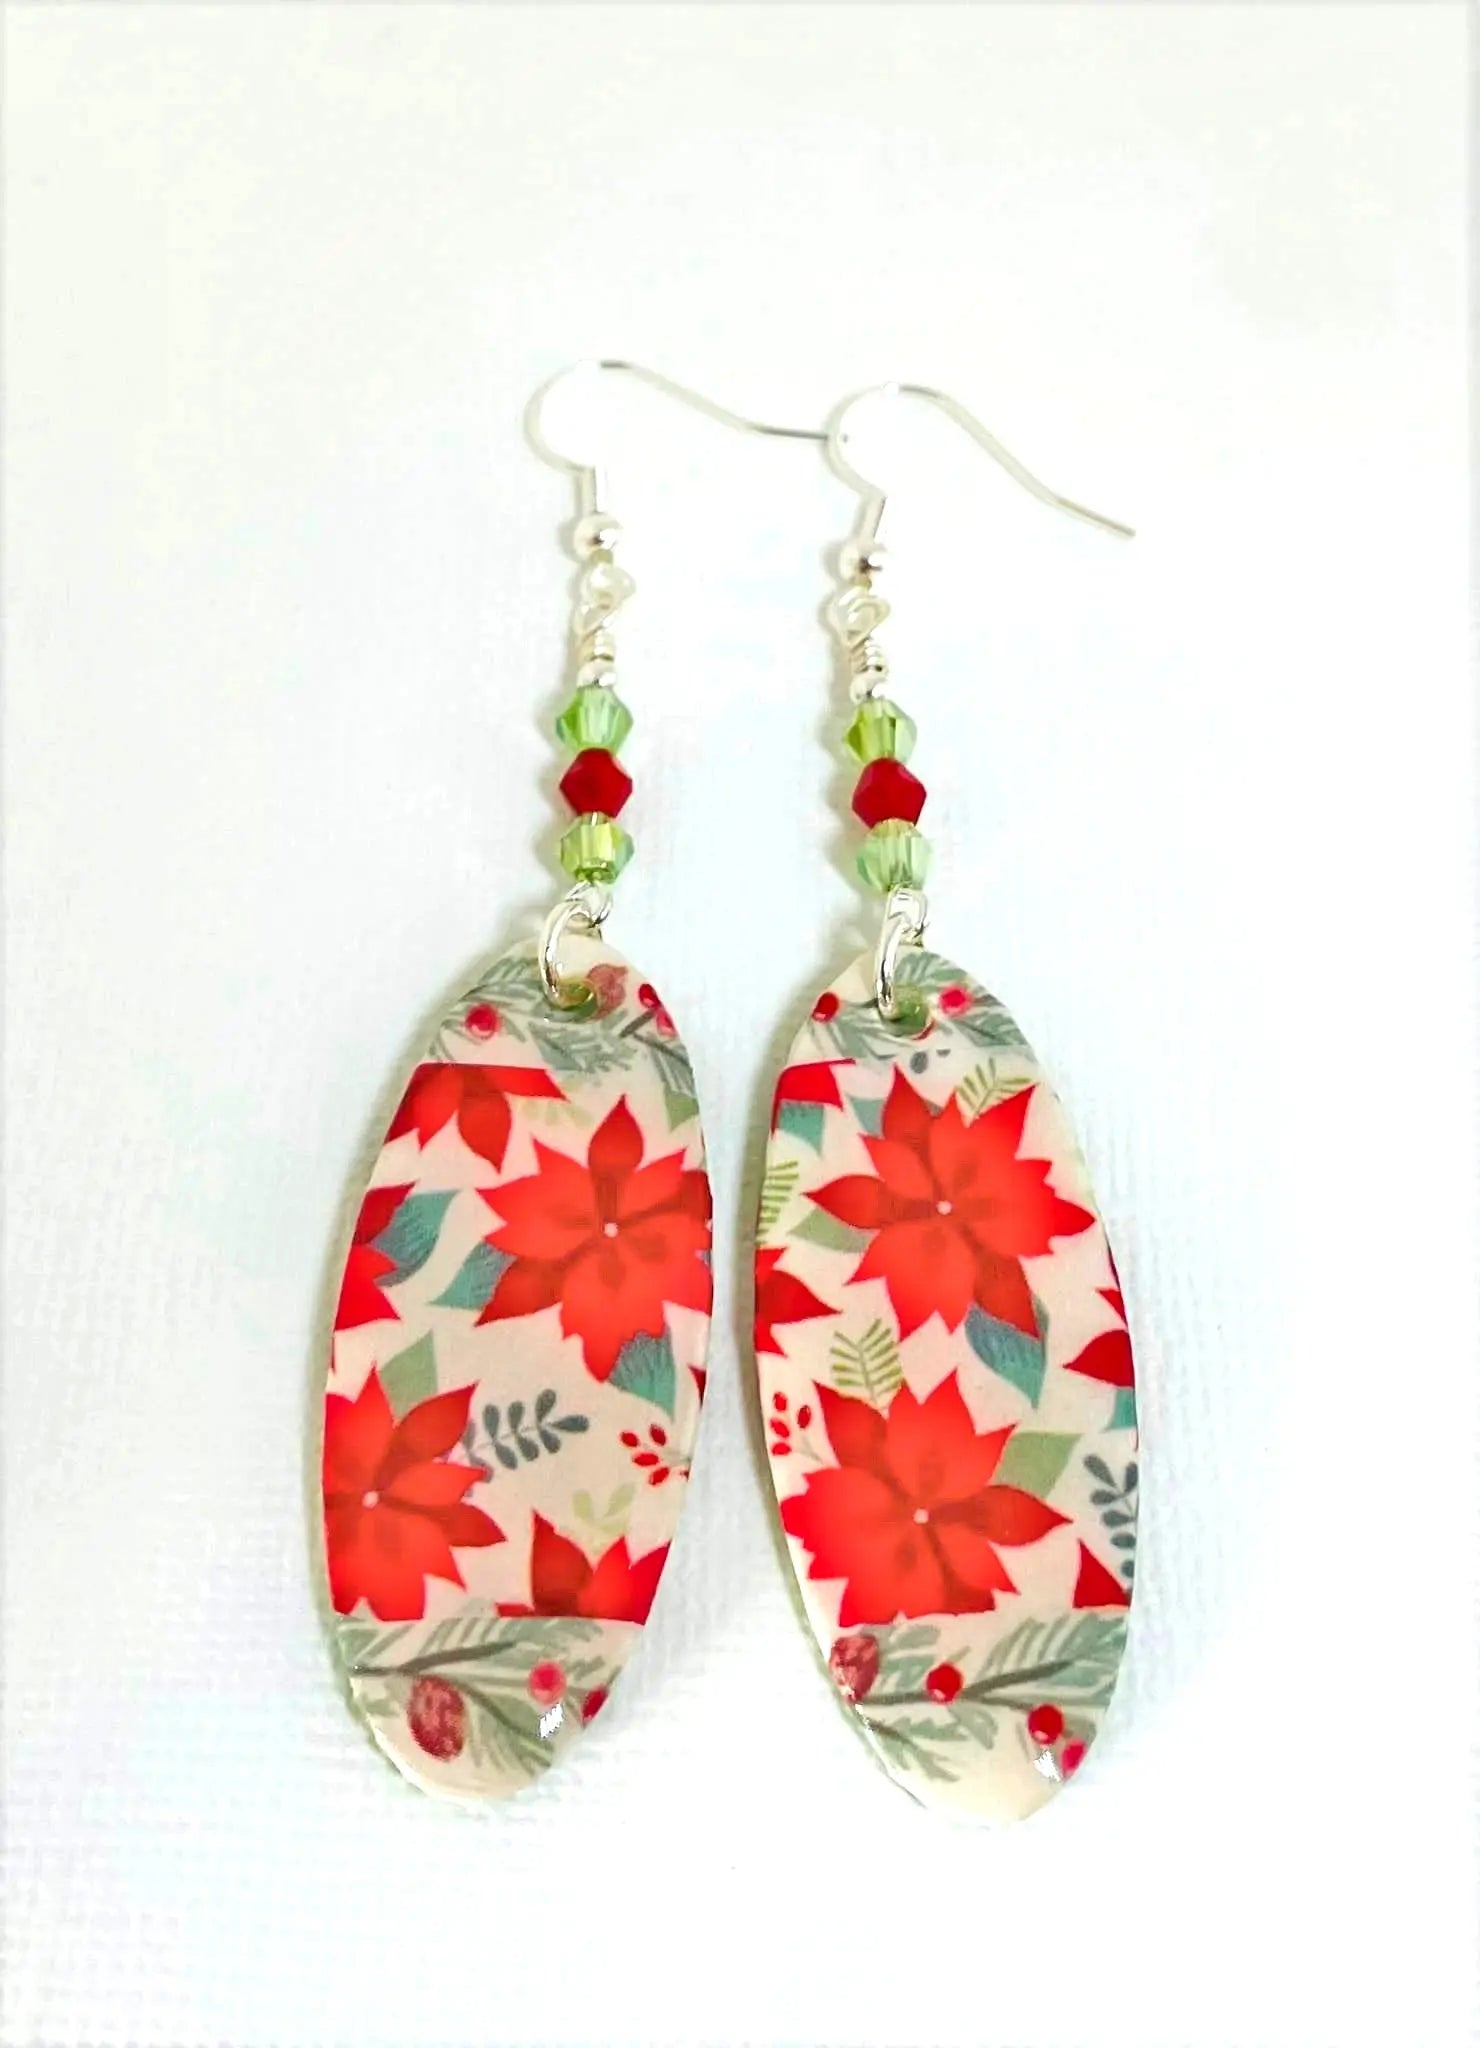 Poinsettia Earrings handcrafted by Linda - Image #1